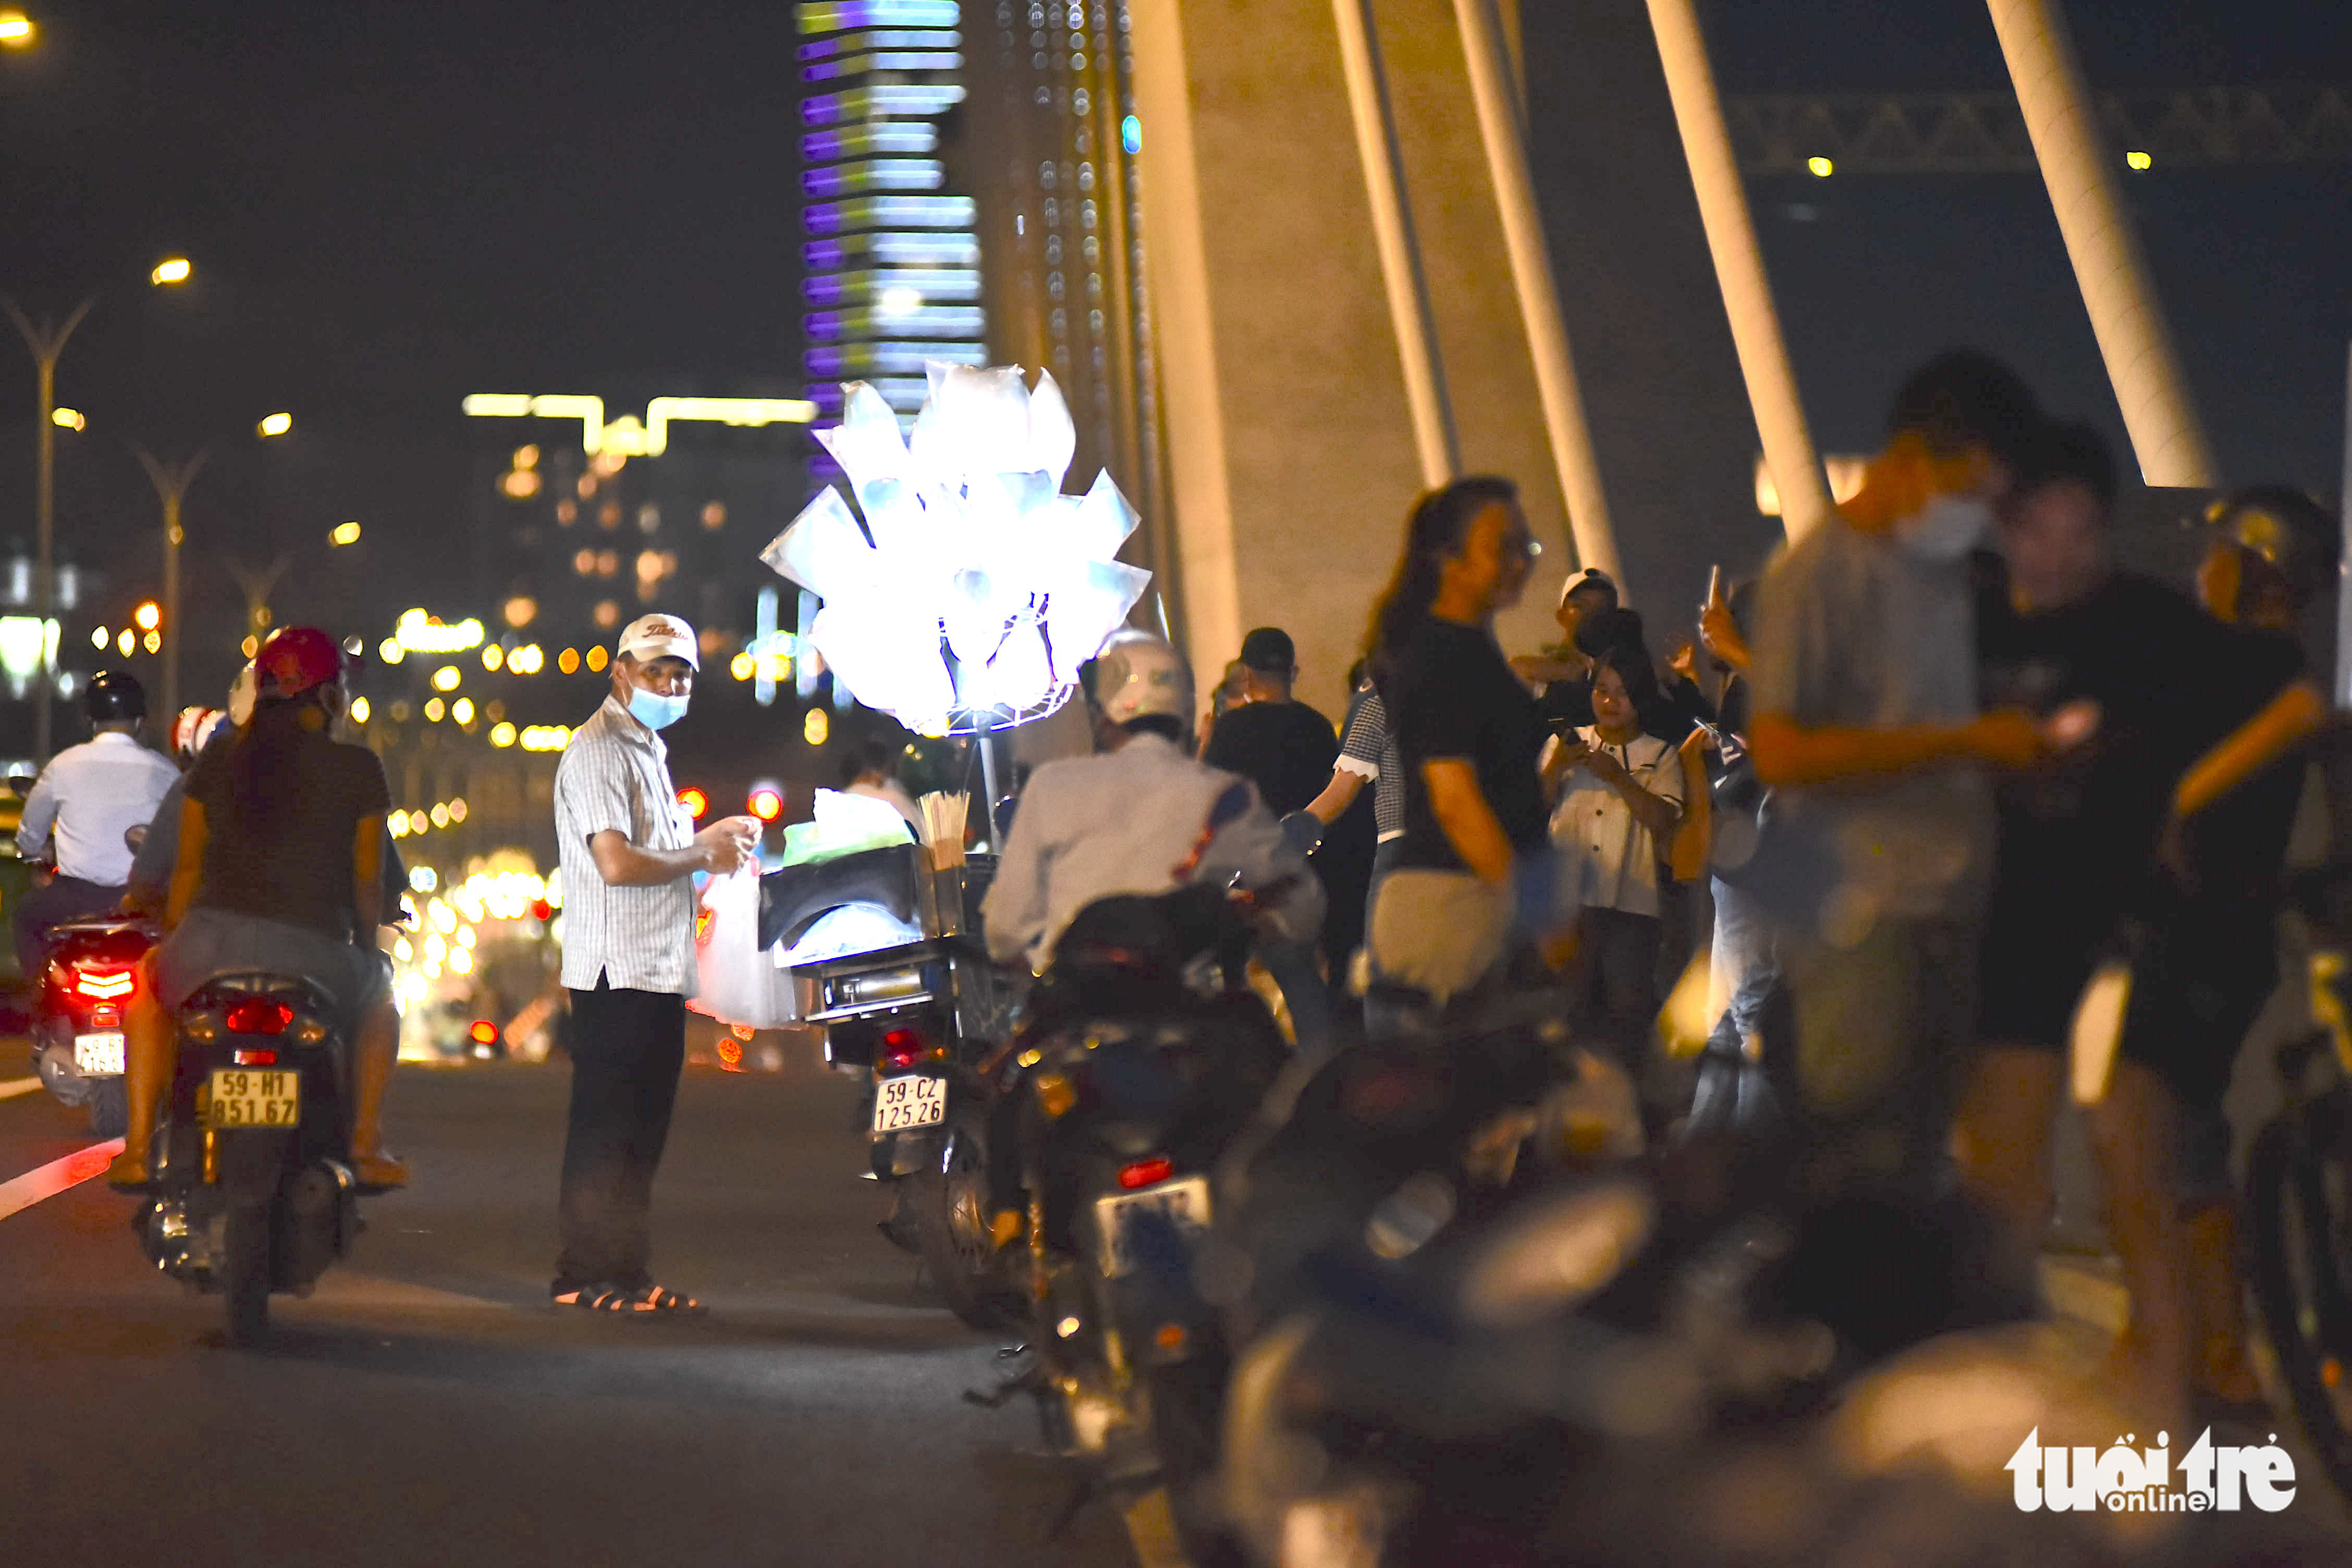 A candy street vendor and people illegally park their motorbikes on the Thu Thiem 2 Bridge in District 1, Ho Chi Minh City. Photo: Ngoc Phuong / Tuoi Tre